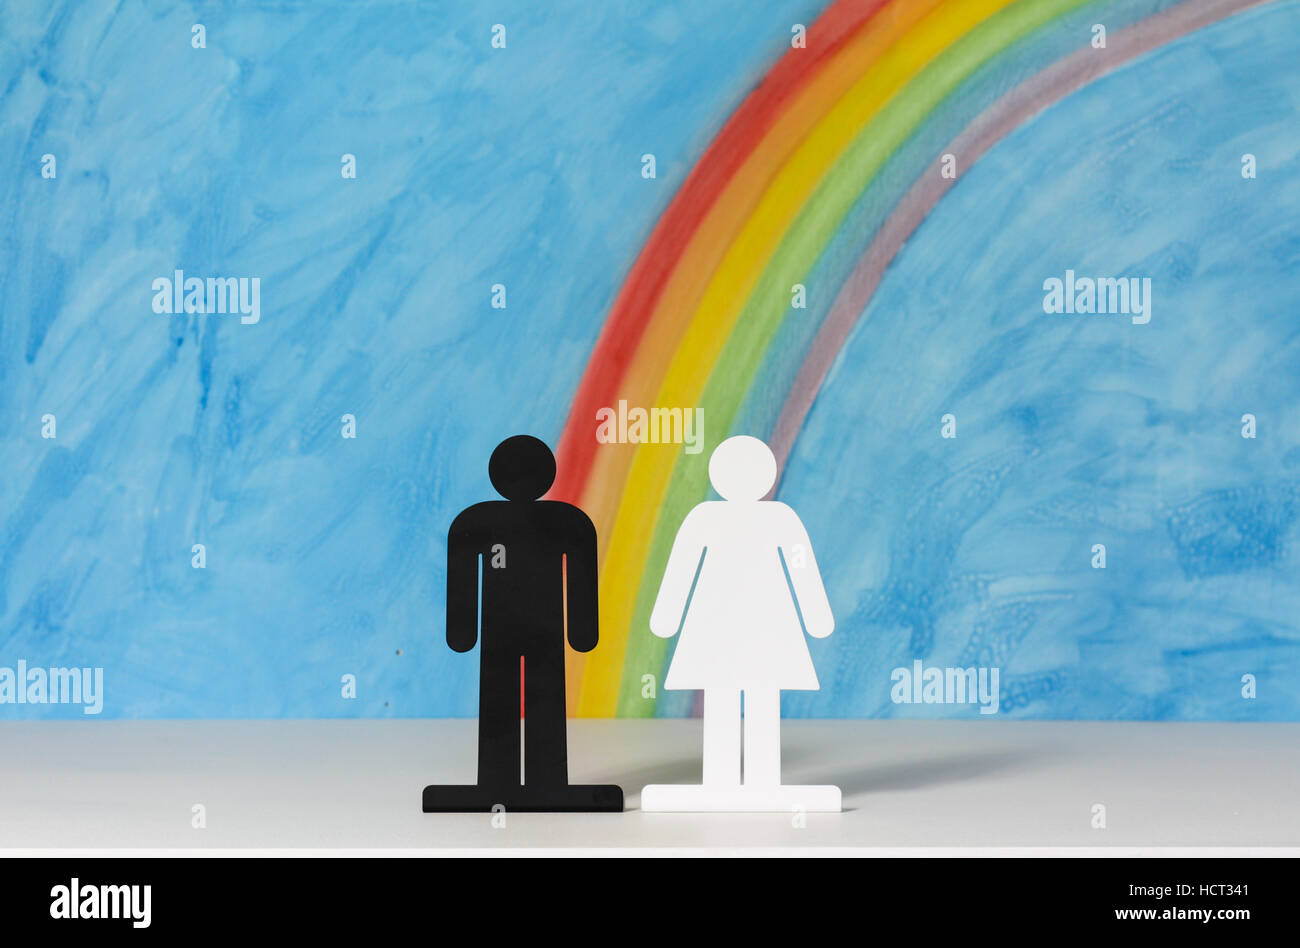 Man and women icons with a rainbow and blue sky to illustrate the concept of marriage, relationships and gender equality. Stock Photo